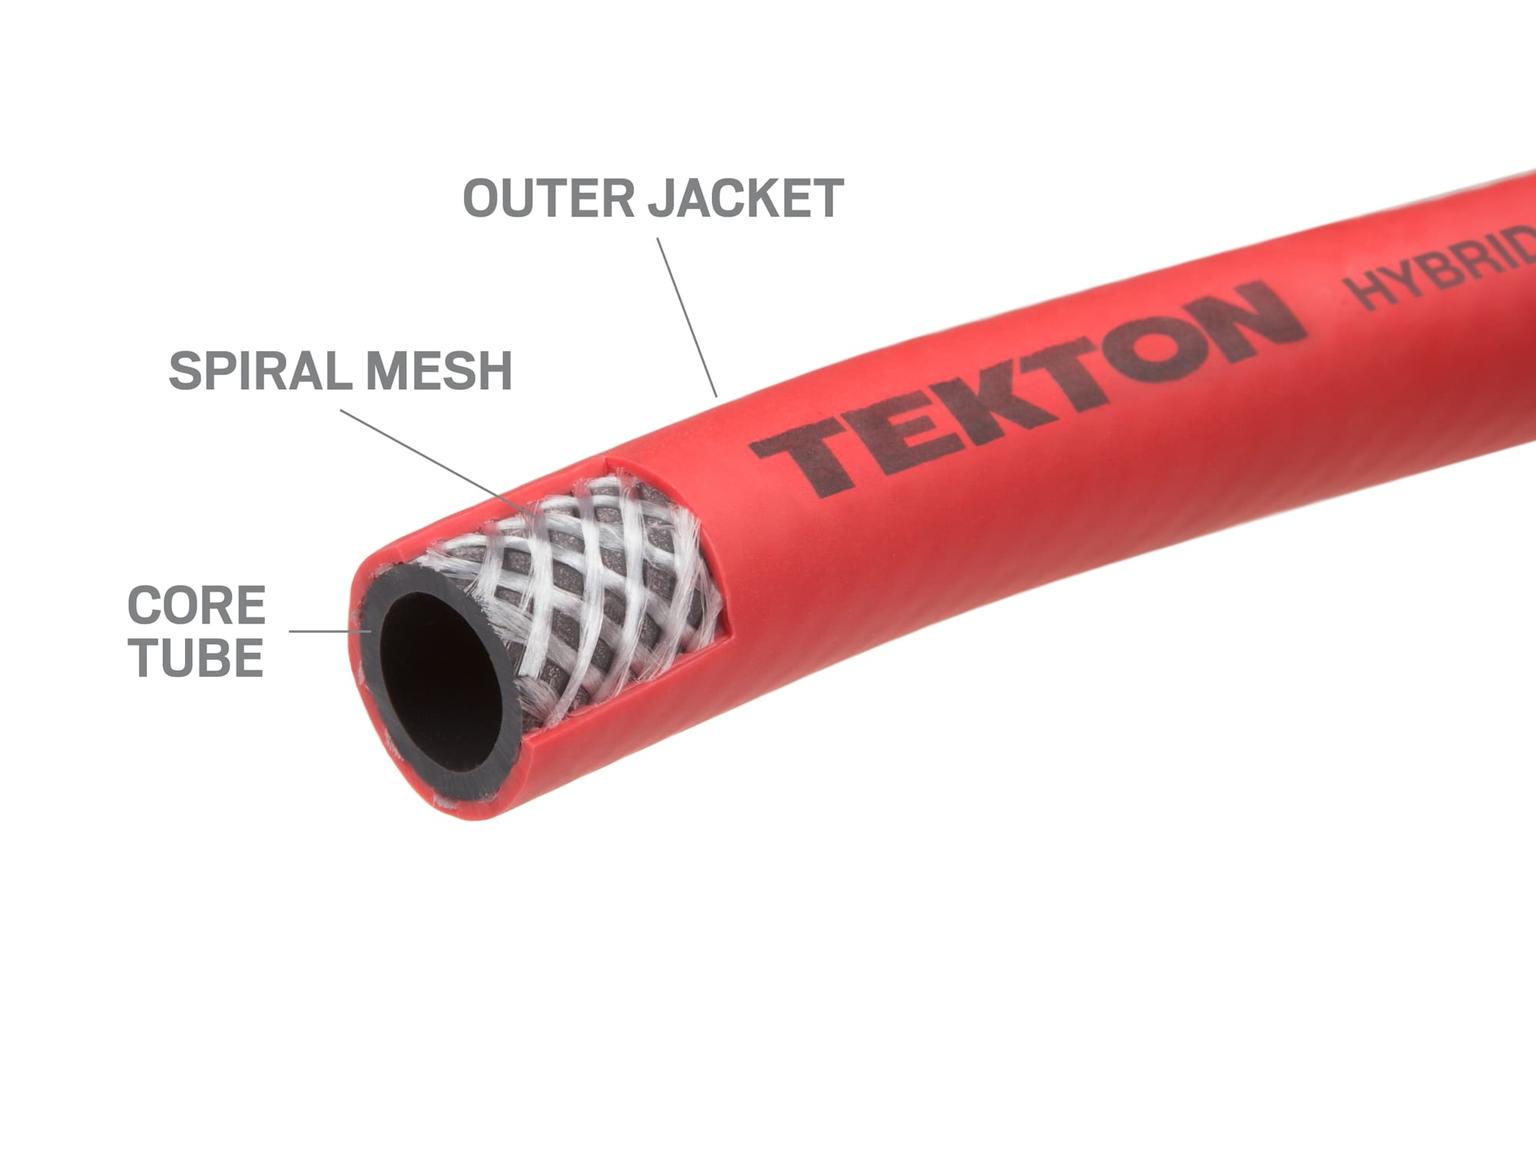 TEKTON 46132-S 3/8 Inch I.D. x 3 Foot Hybrid Lead-In Air Hose (300 PSI)